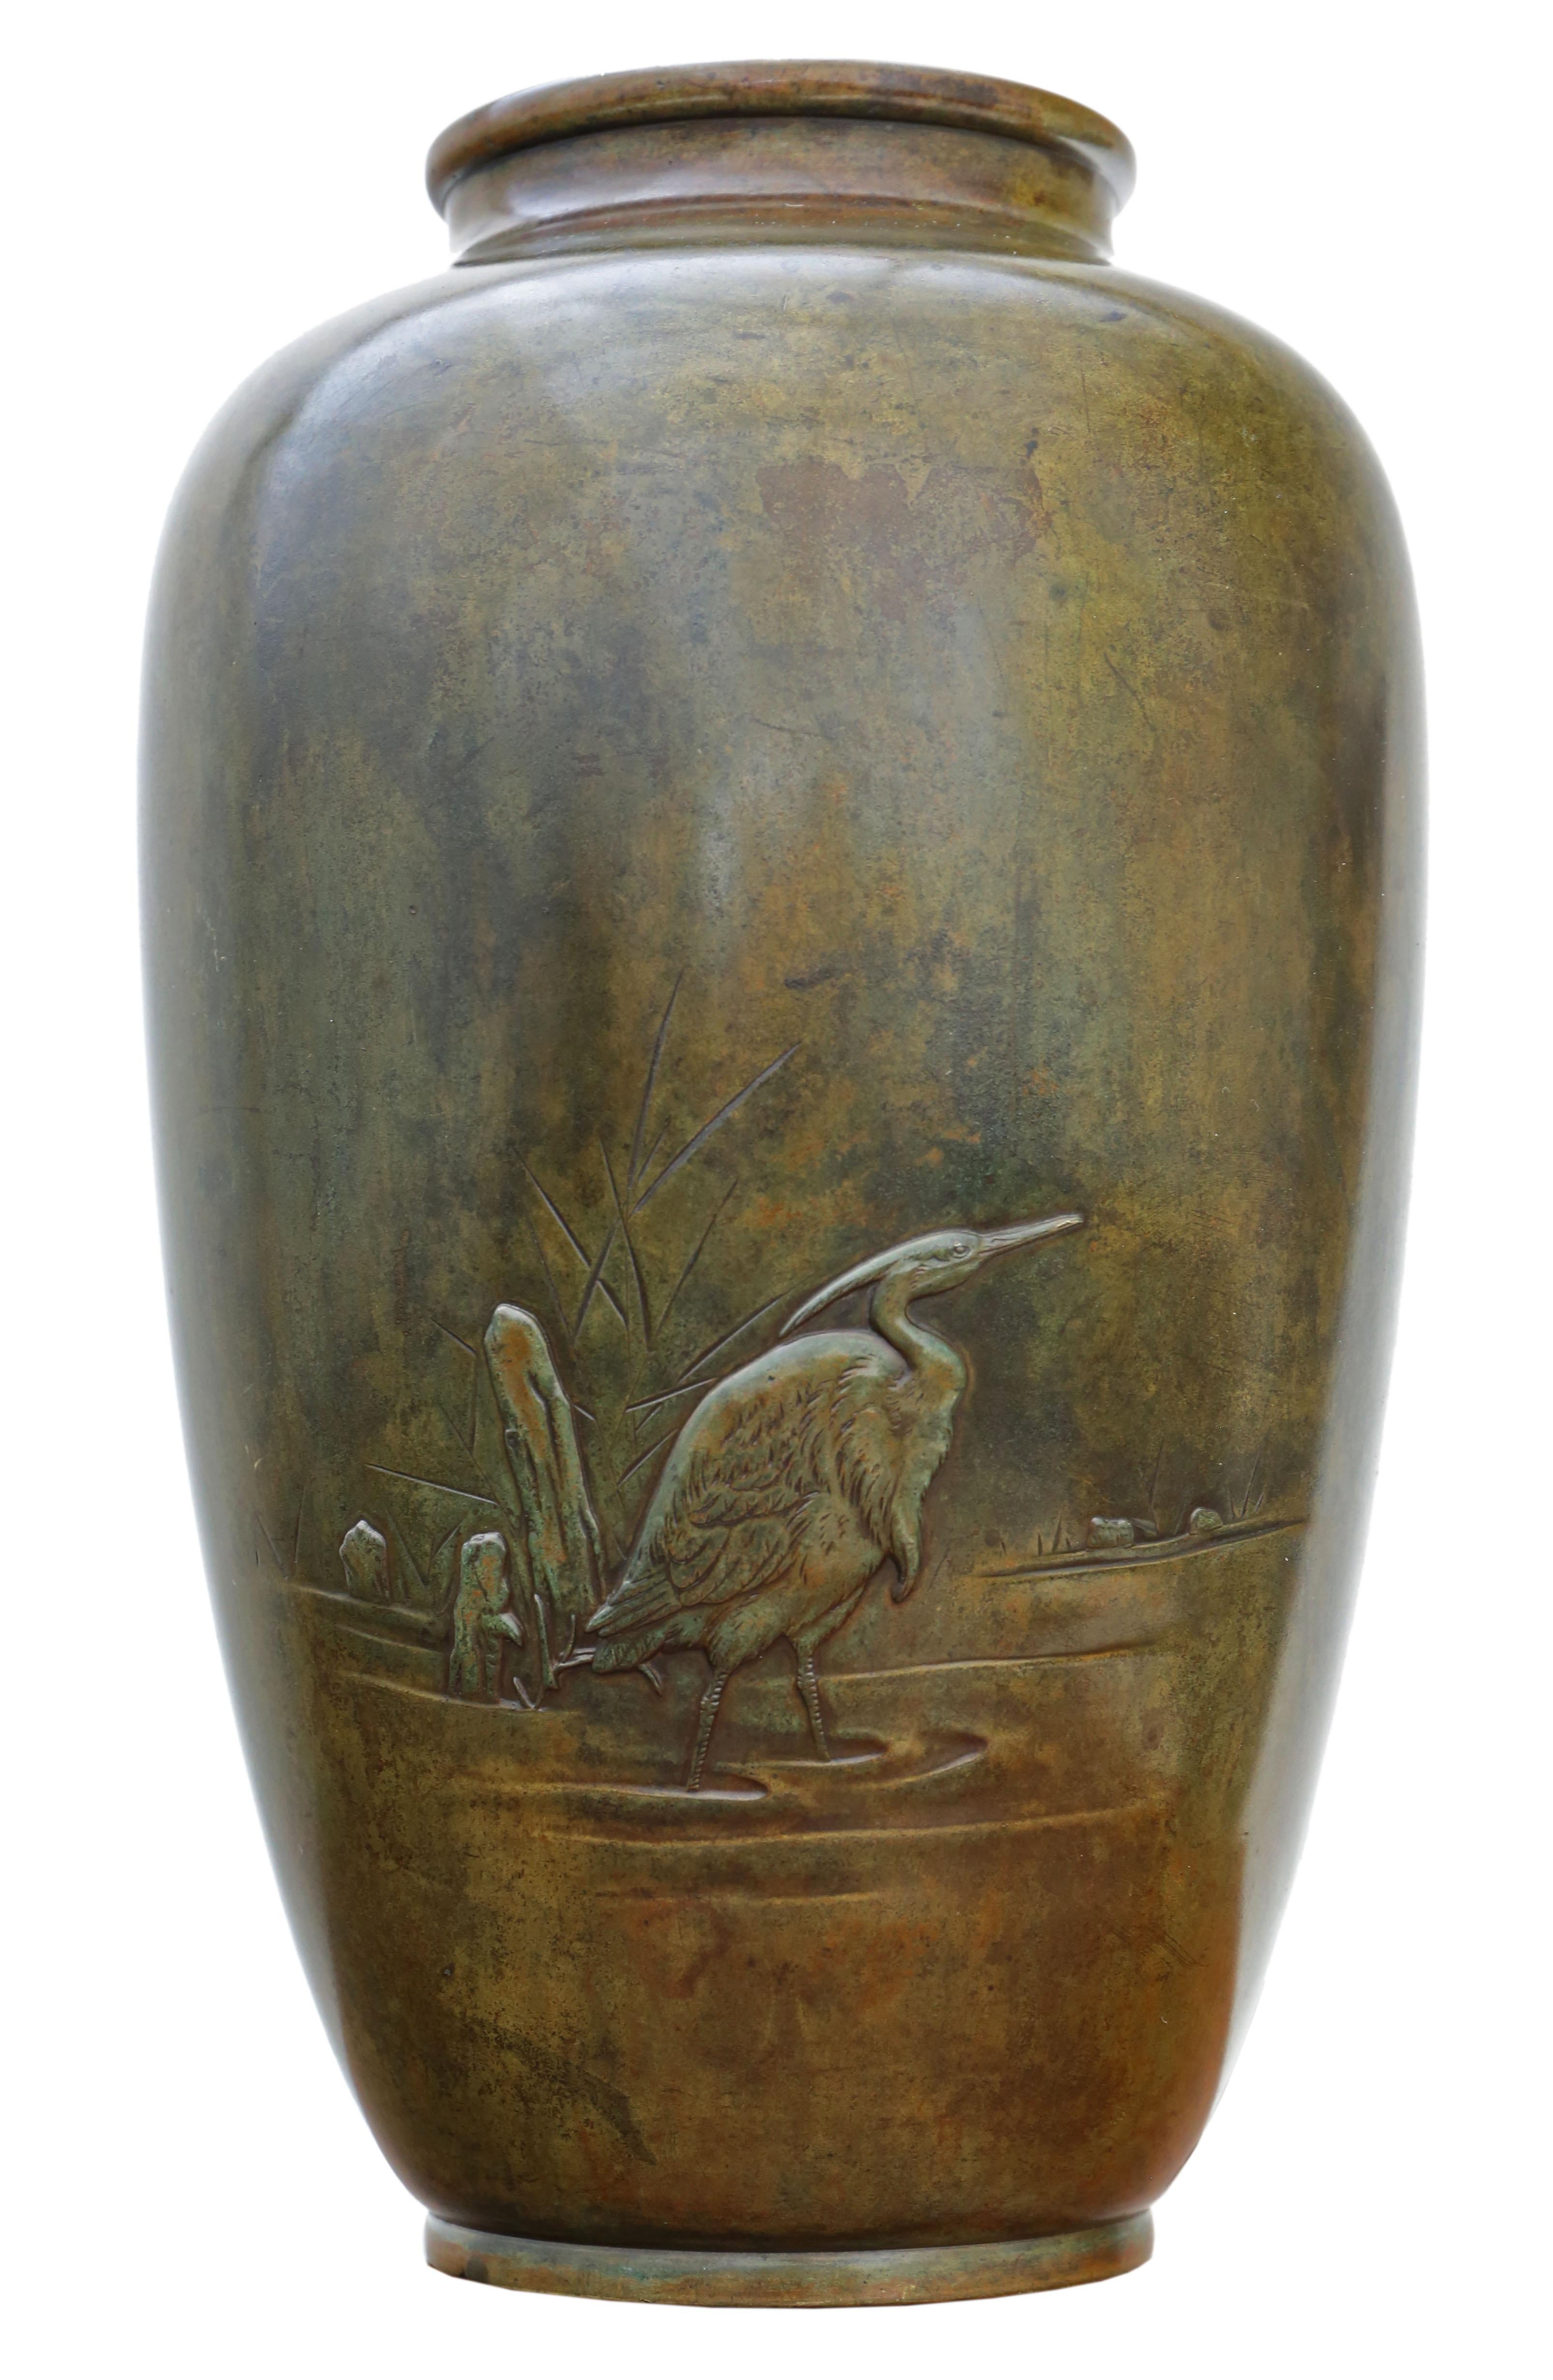 Antique Japanese Meiji Period Bronze Vase - Exquisite Crane Depiction!

This exceptional bronze vase from the Meiji period features a stunning depiction of cranes, symbolizing longevity and good fortune in Japanese culture. With its rare green hue,